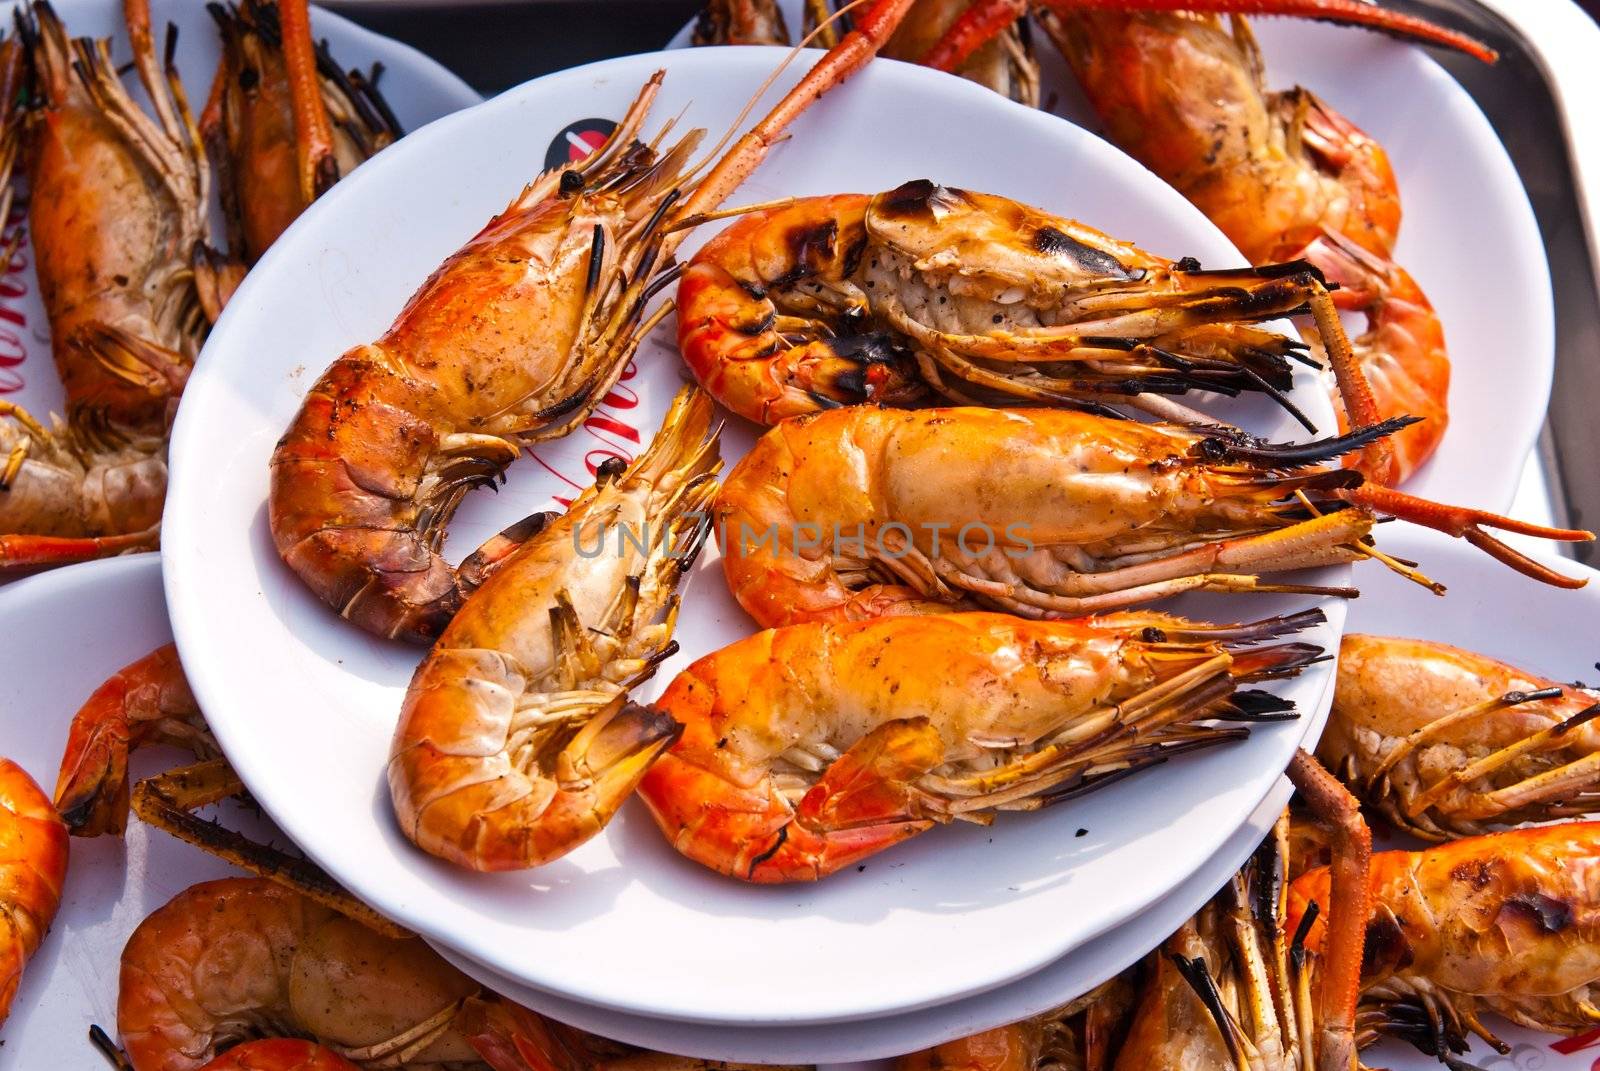 Flame grilled large prawns on white plates, use for seafood, health and wellness related concepts
